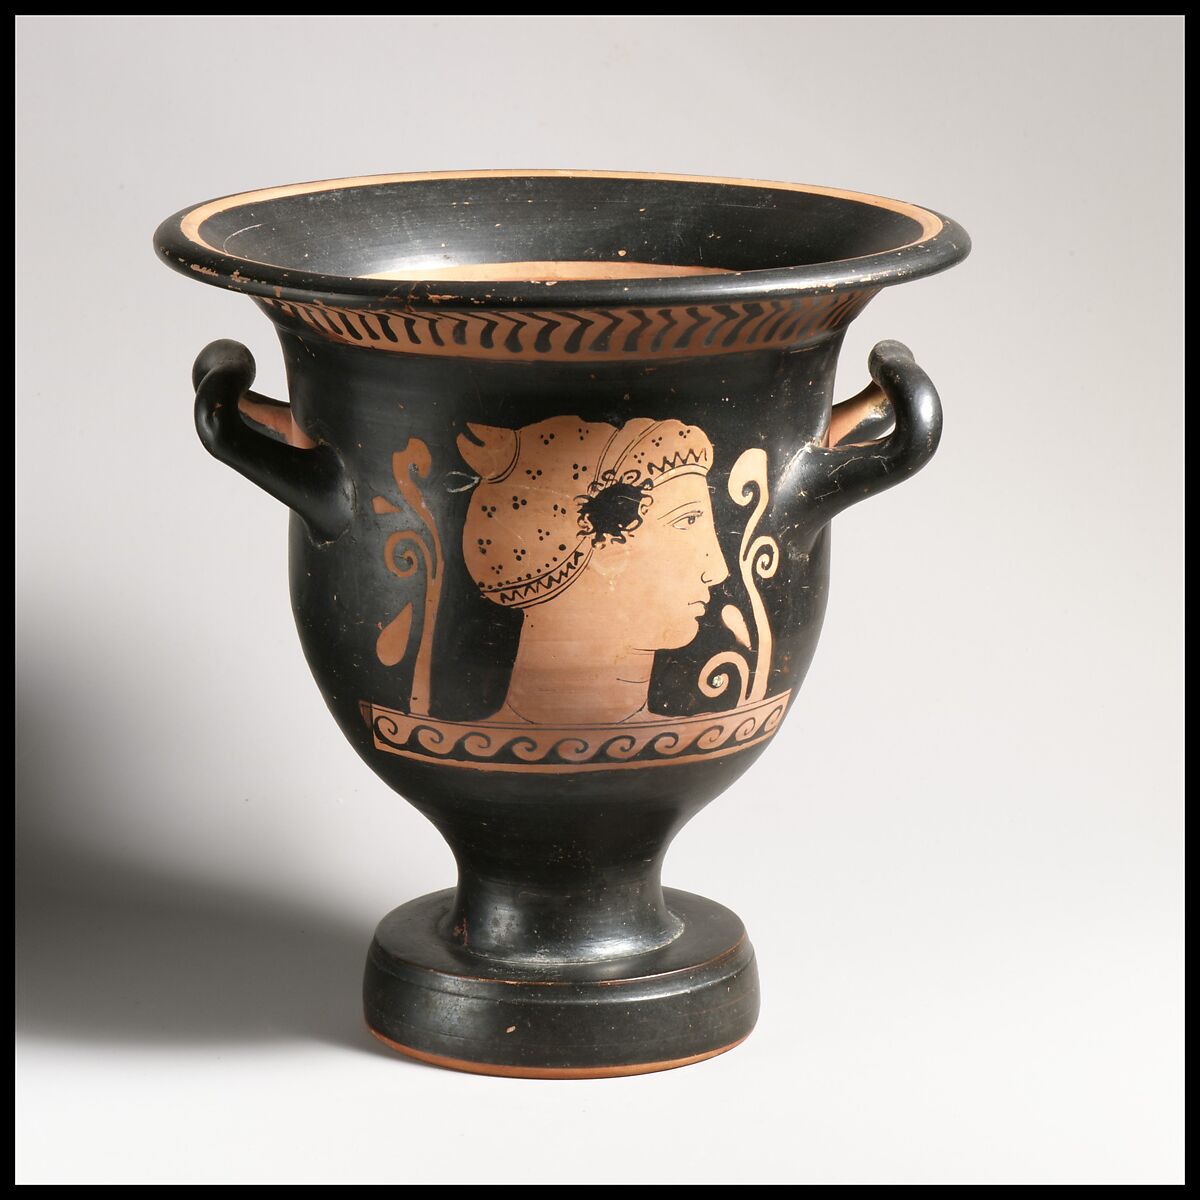 Terracotta bell-krater (bowl for mixing wine and water), Attributed to the Chevron Group, Archidamos Sub-Group, Terracotta, Greek, South Italian, Apulian 